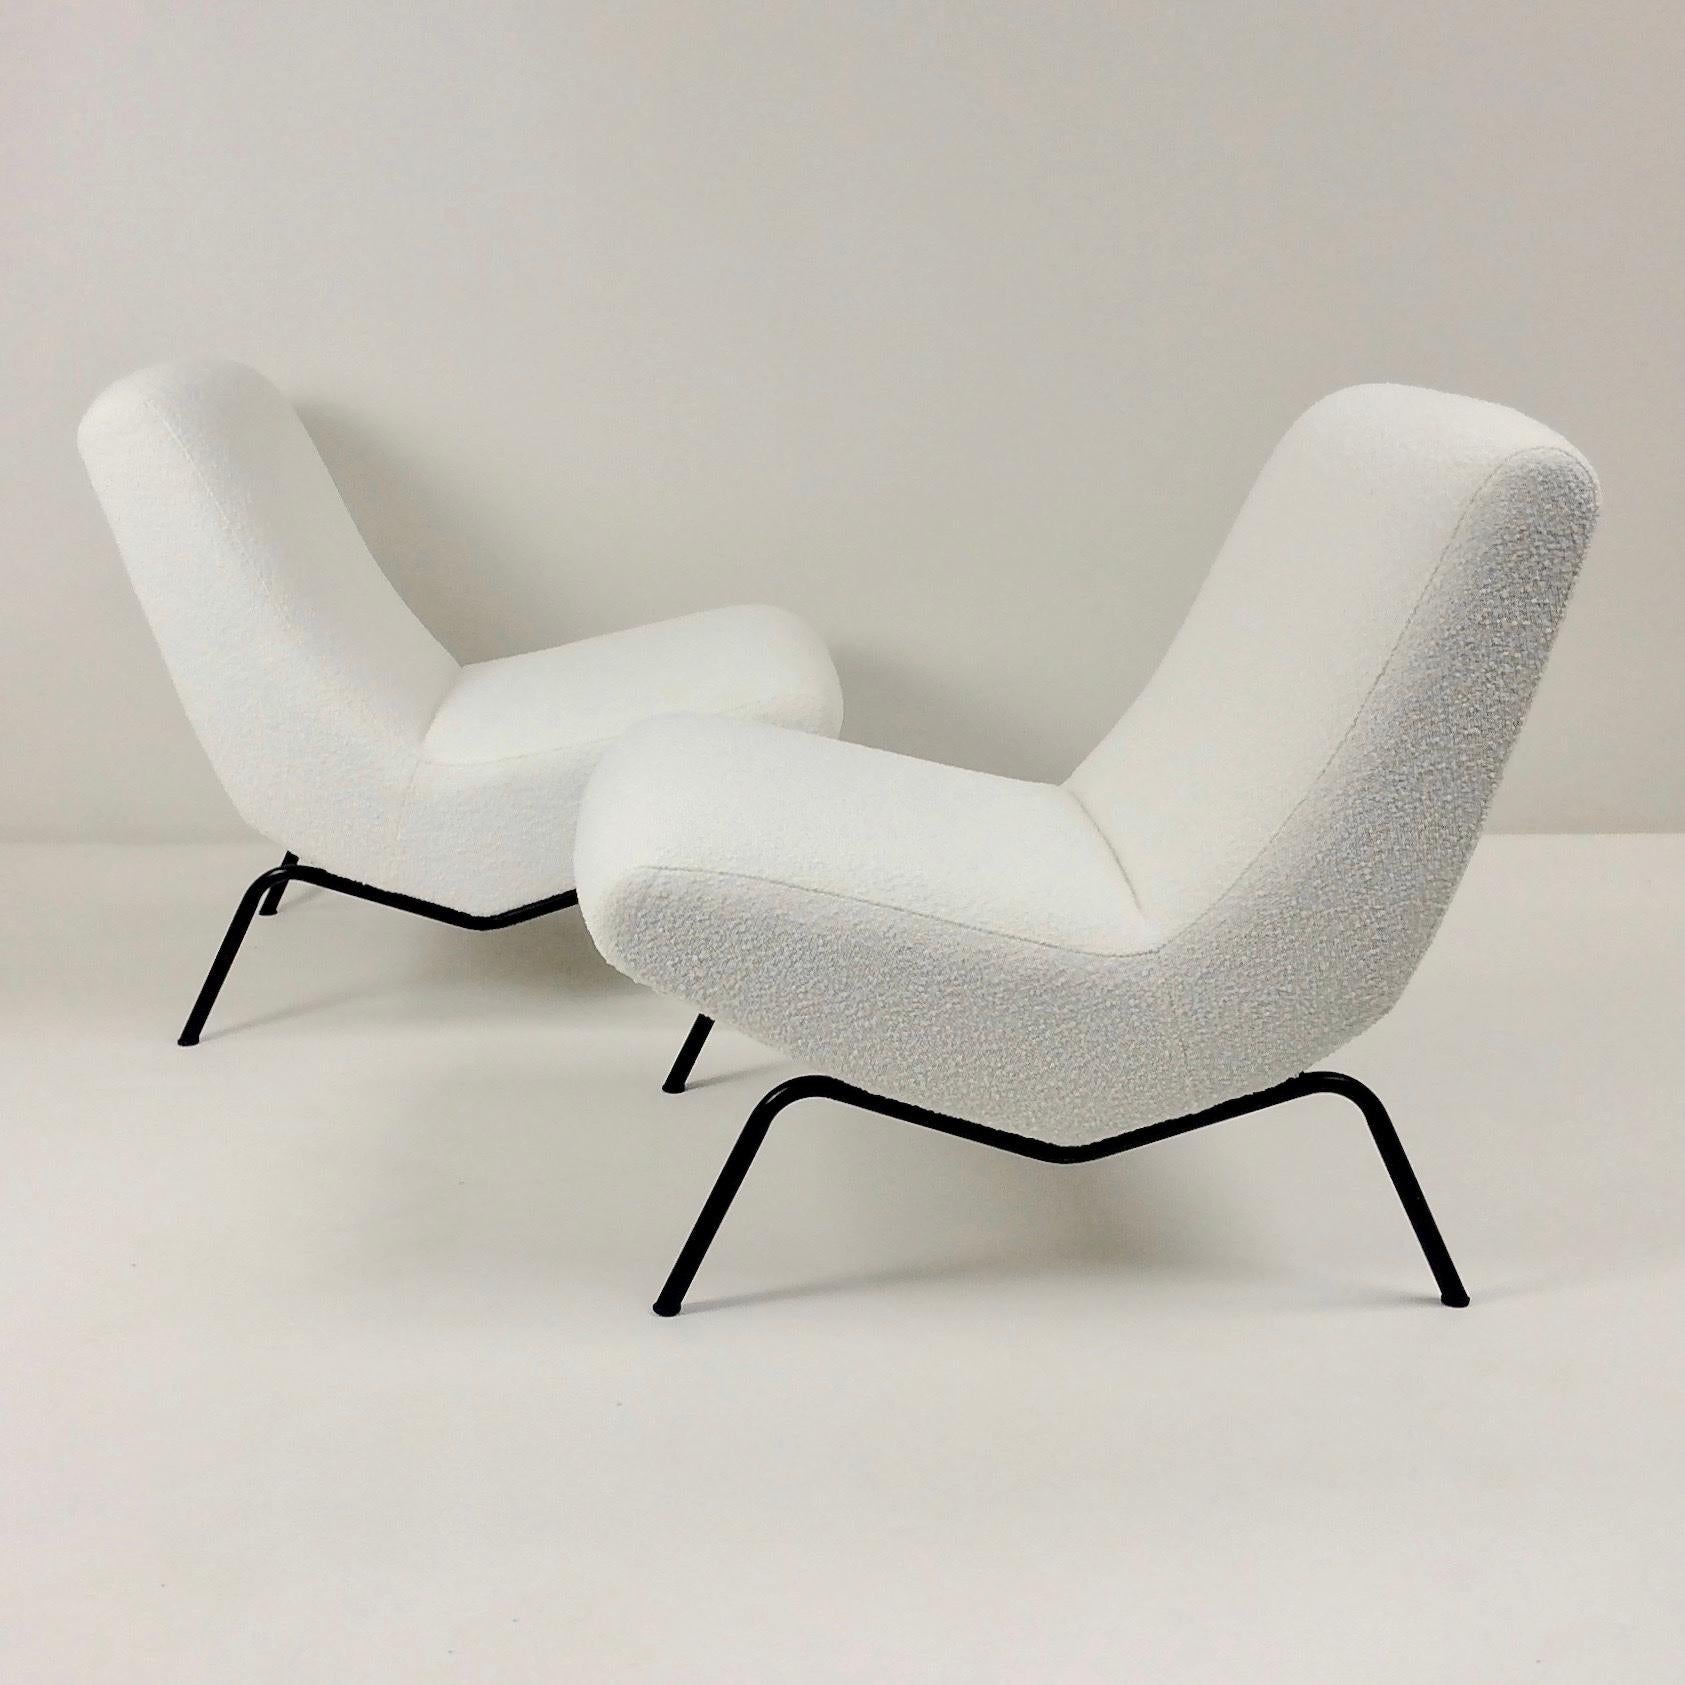 Mid-Century Modern Pierre Paulin Pair of Lounge Chairs, CM194 Model for Thonet, circa 1957, France